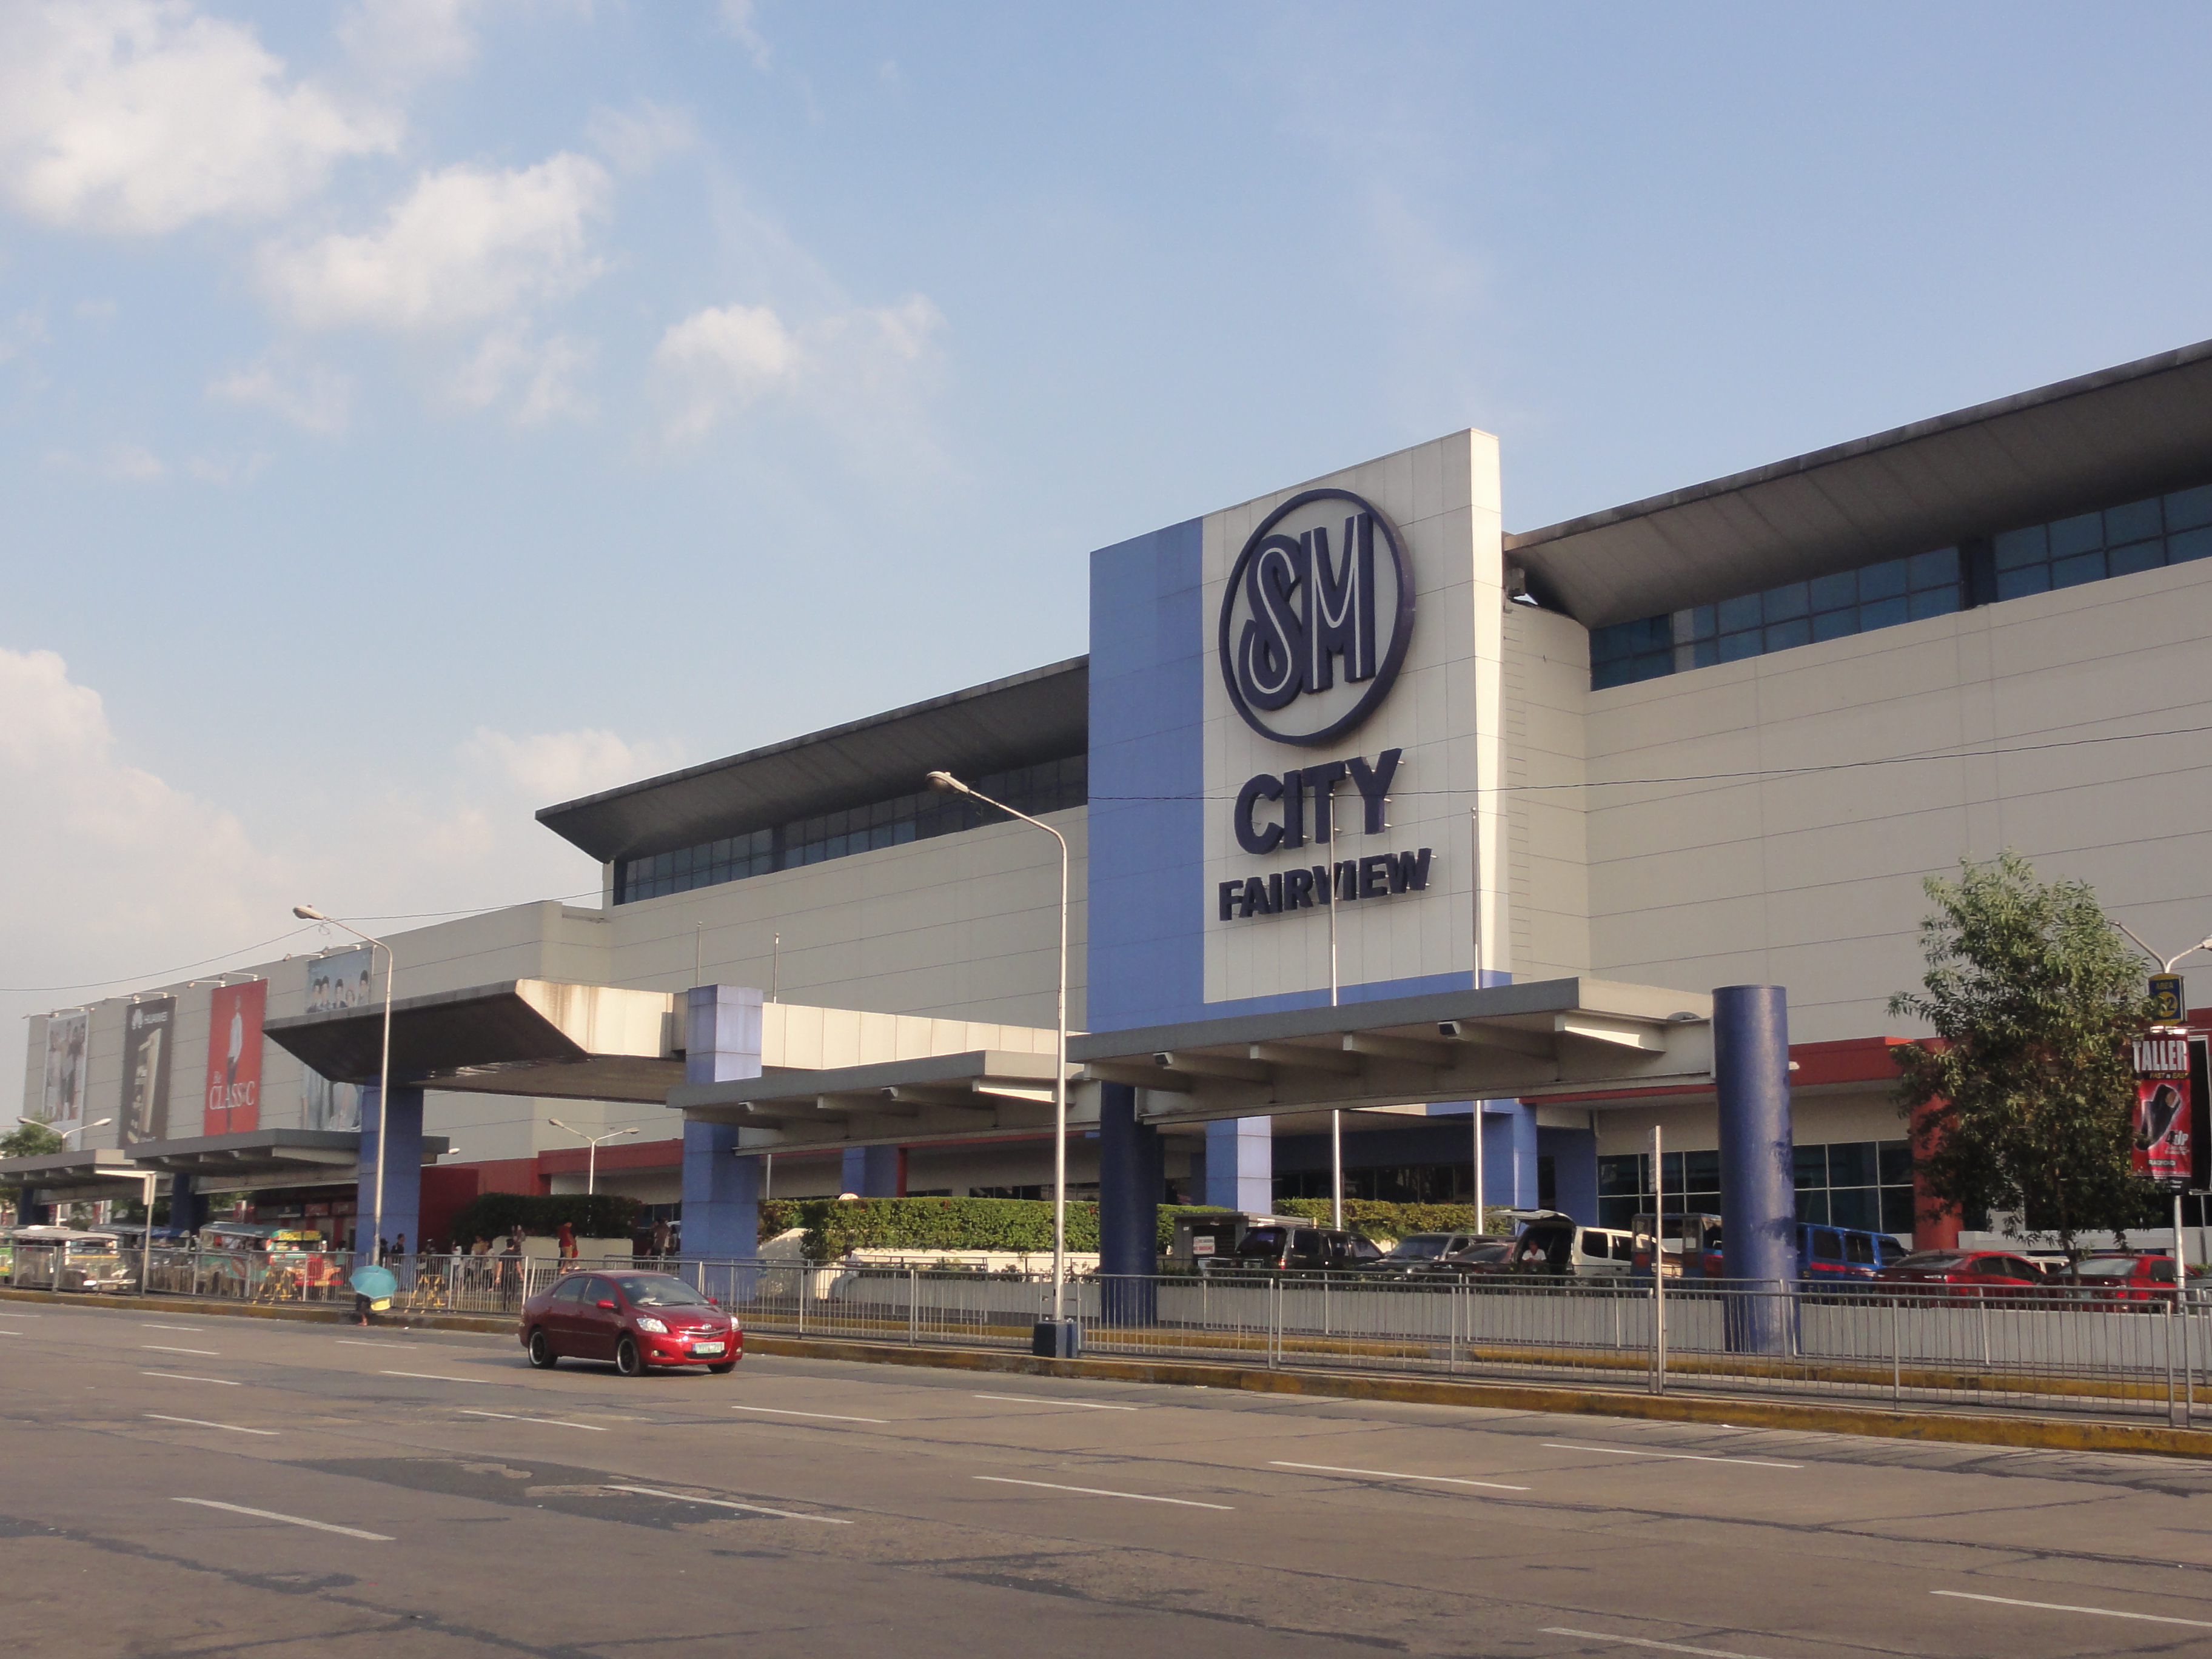 SM City Fairview - Wikiwand